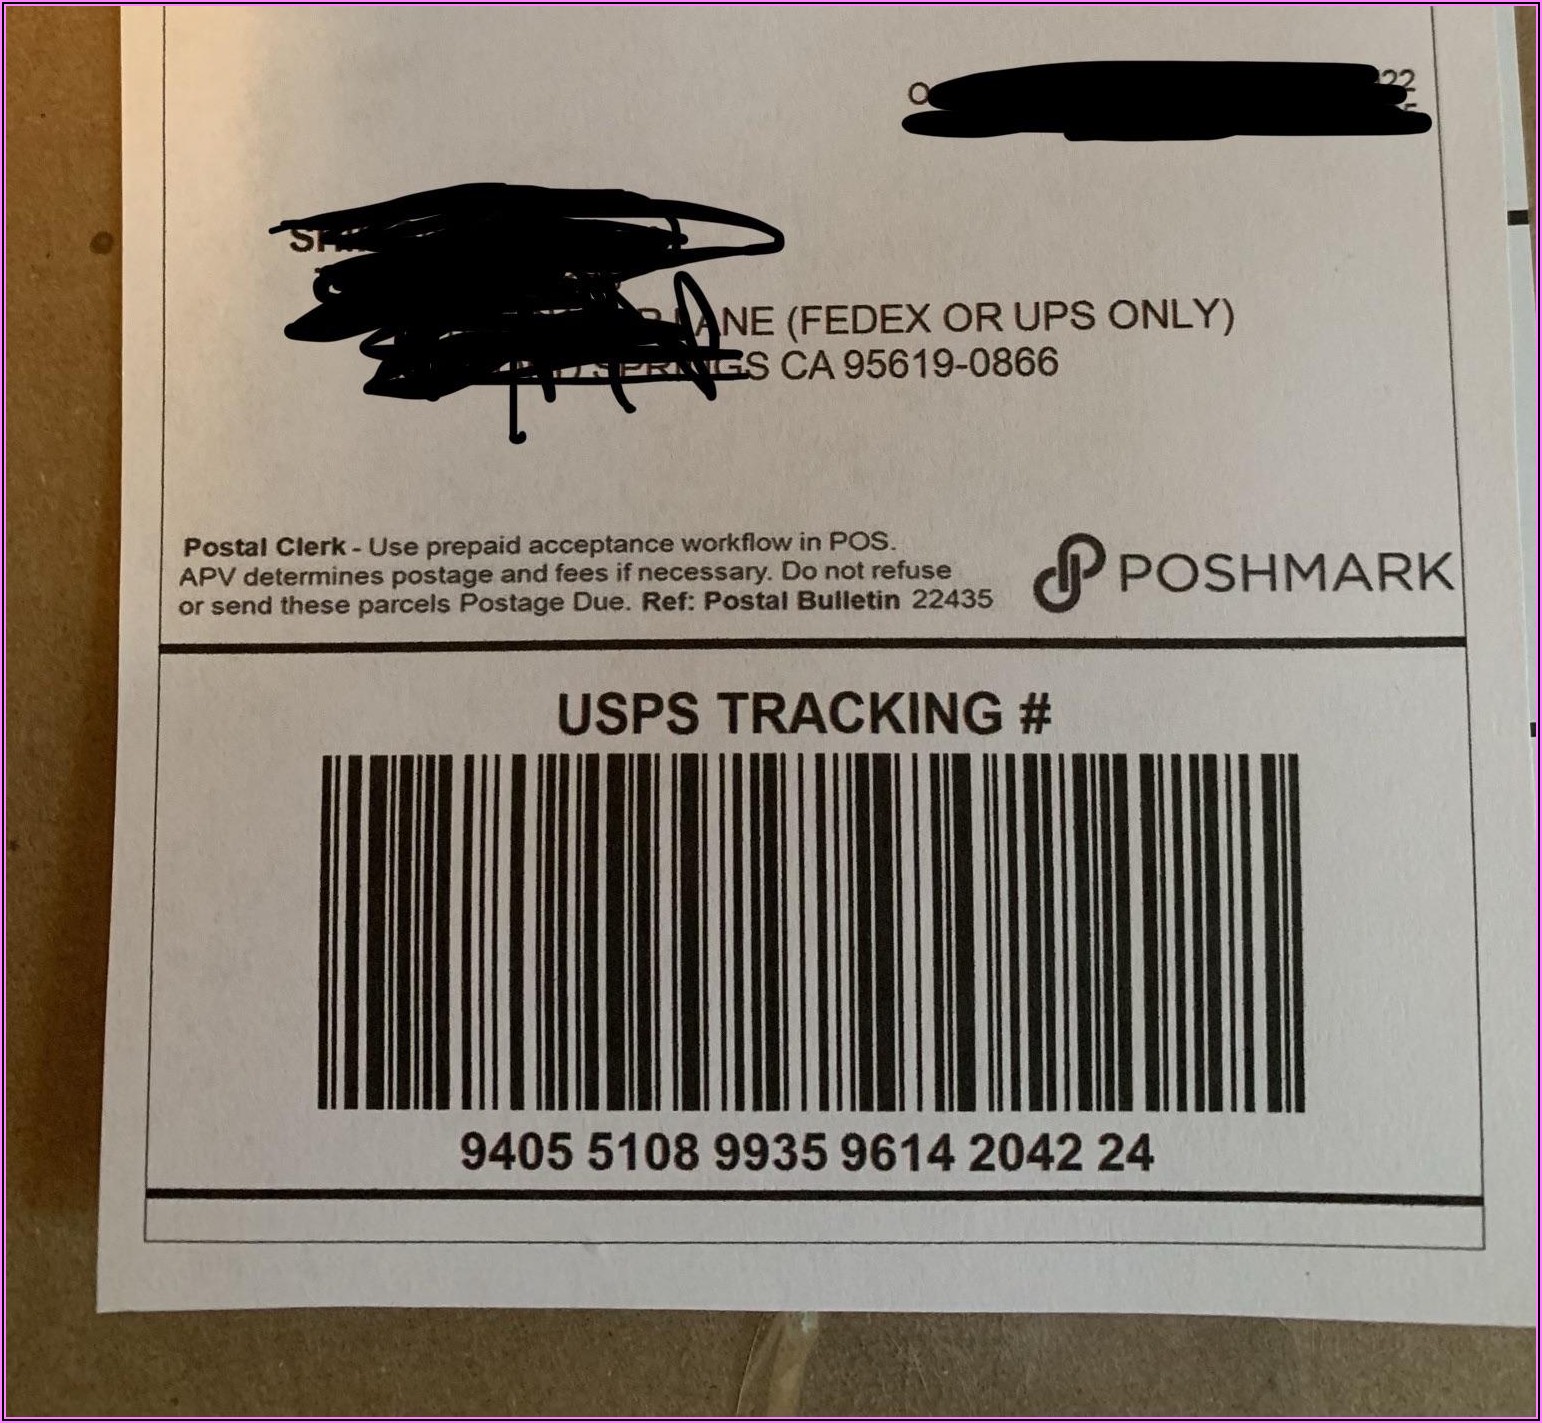 How To Get A Self Addressed Prepaid Envelope From Ups